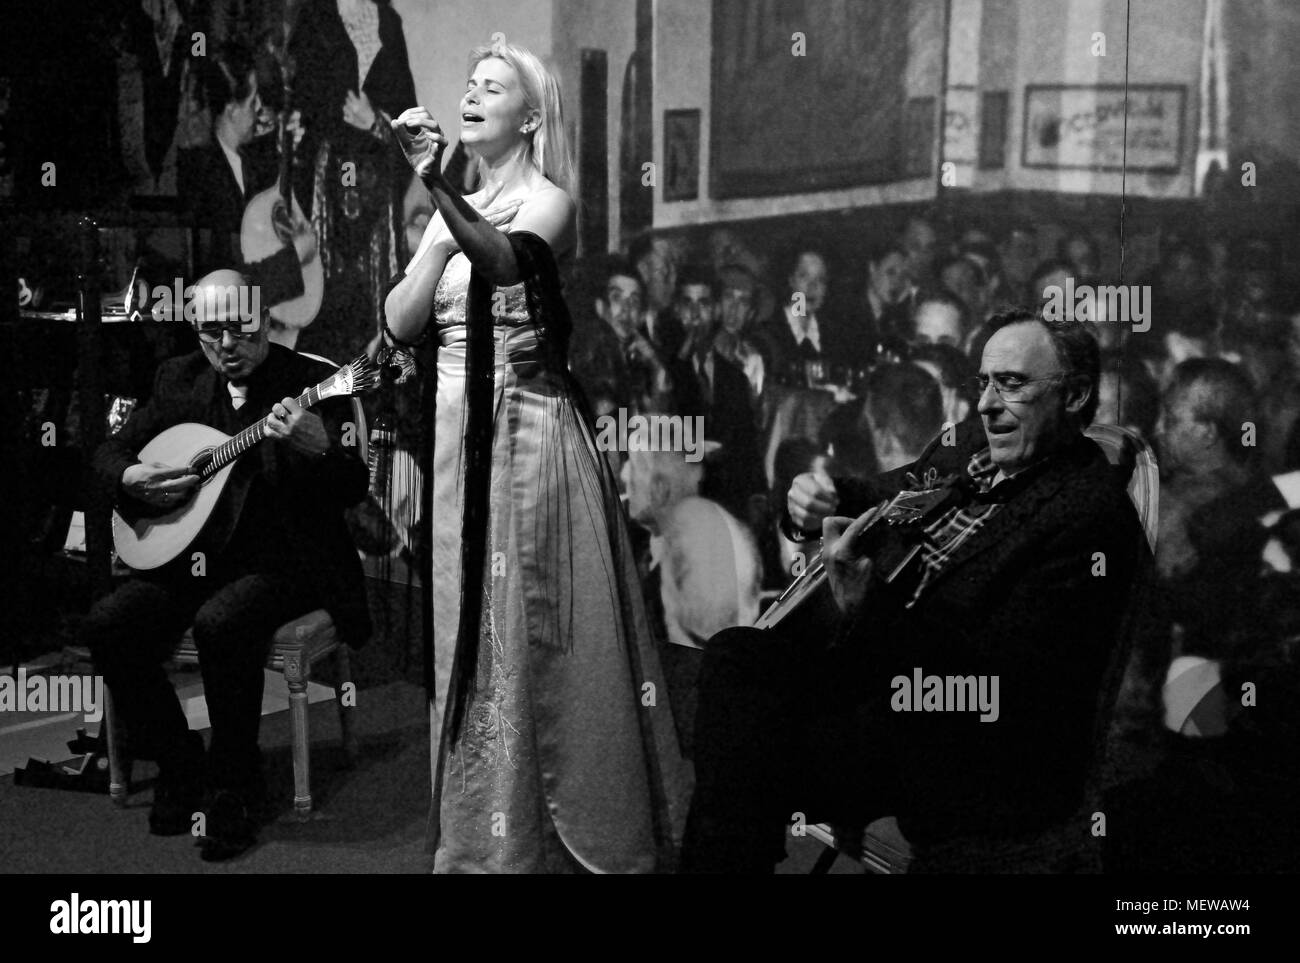 Black and white image with Fado singer and two musicians playing classical guitar and portuguese guitar Stock Photo